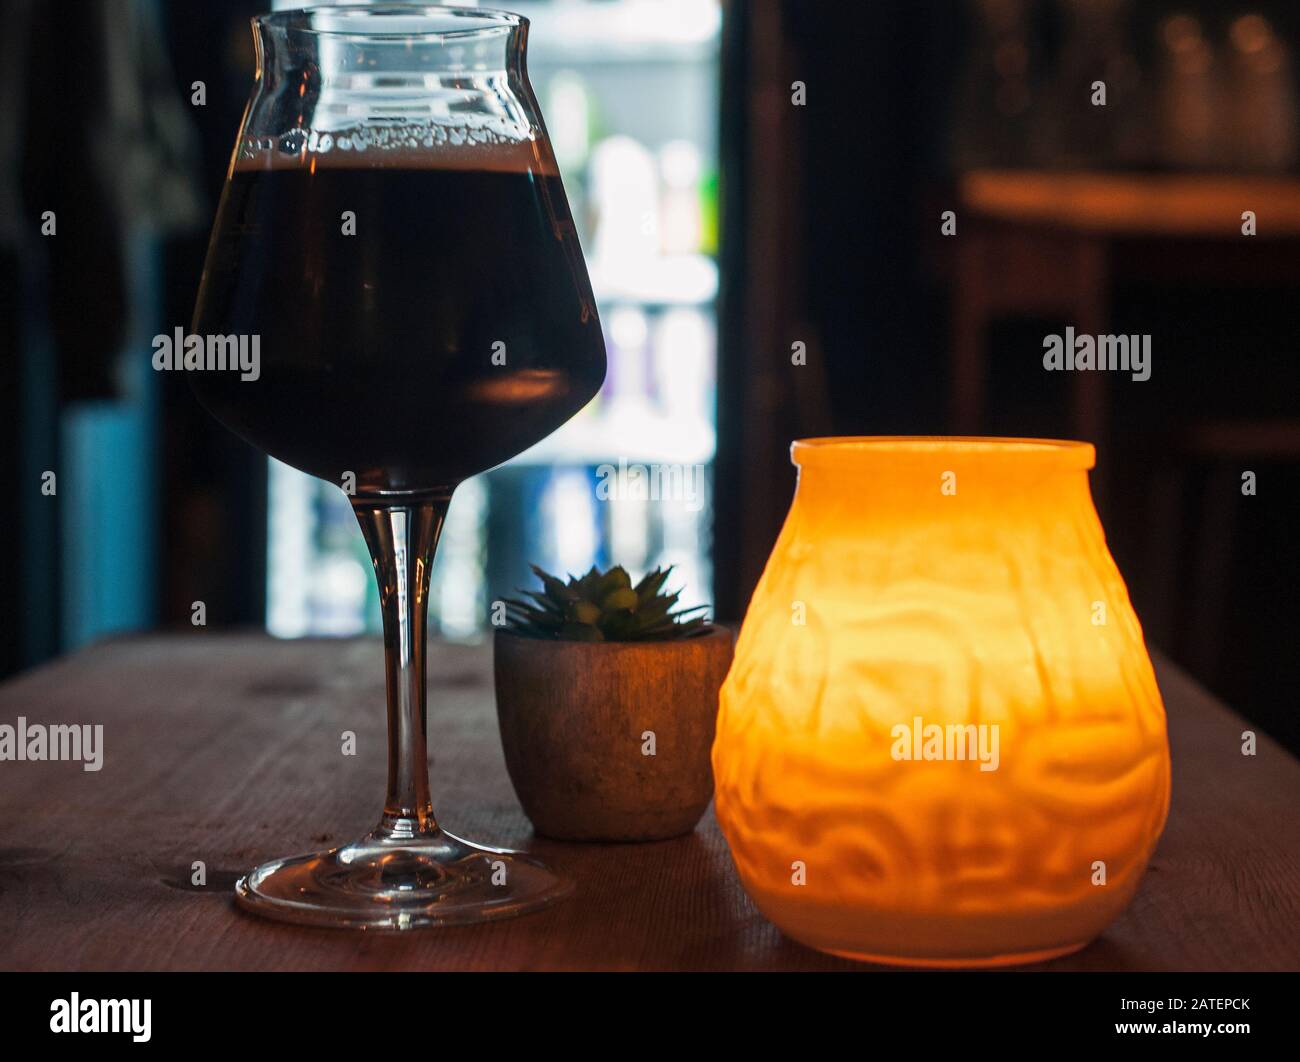 Imperial stout craft beer in a cozy bar with a candle light. Stock Photo